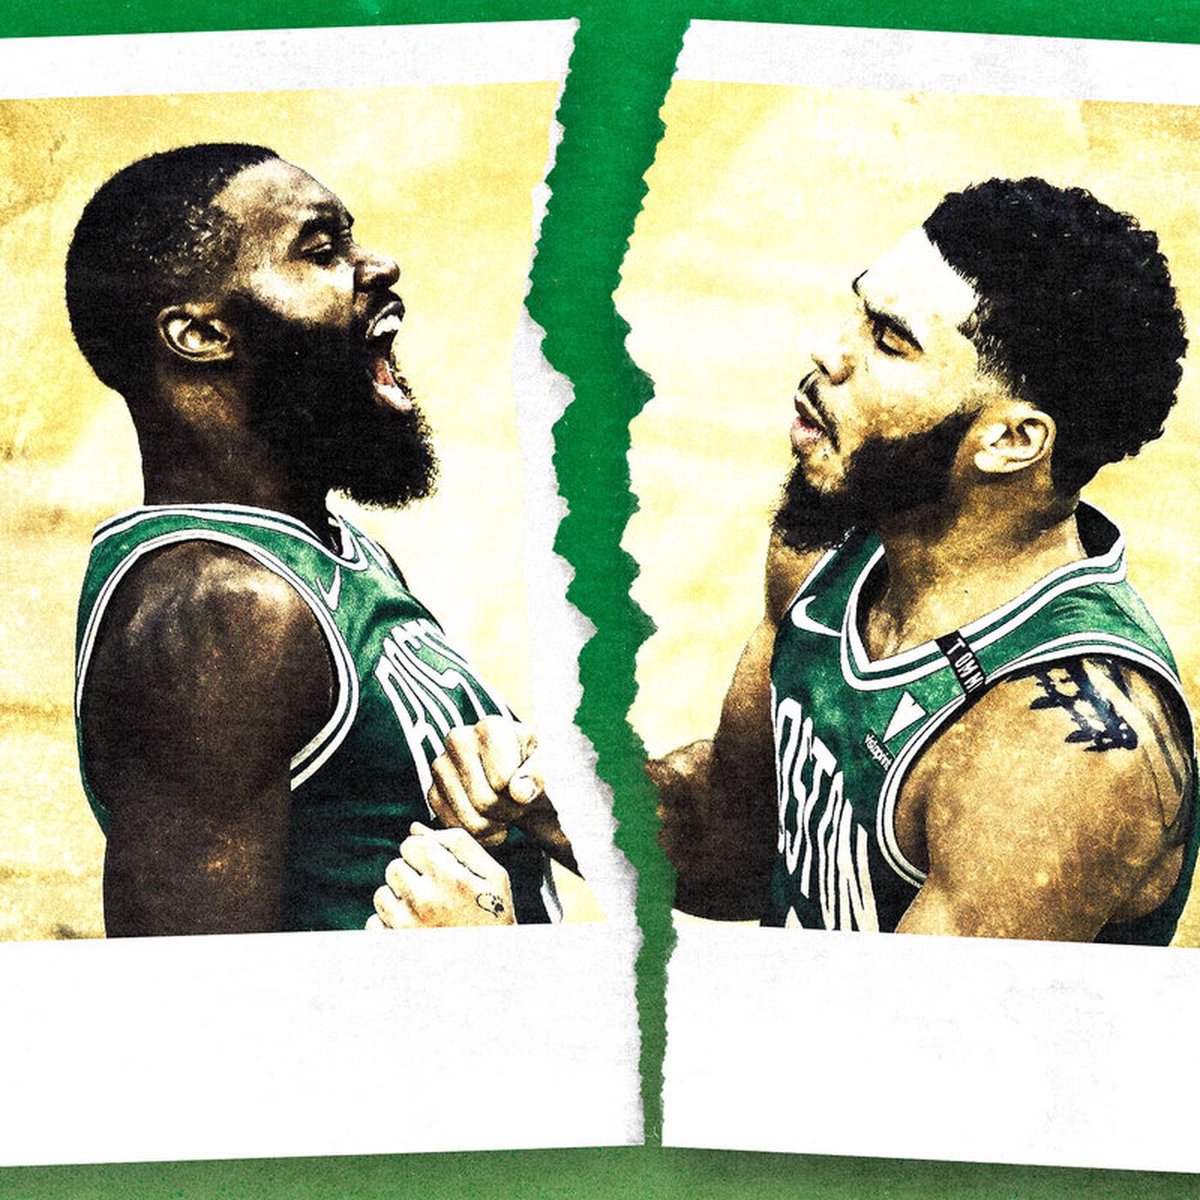 Split them up!! Tatum and Brown will never work out together. Most overrated duo in NBA!! 

Time to shut up the haters.

#DifferentHere #BelieveInBoston #CelticsPride #BleedGreen